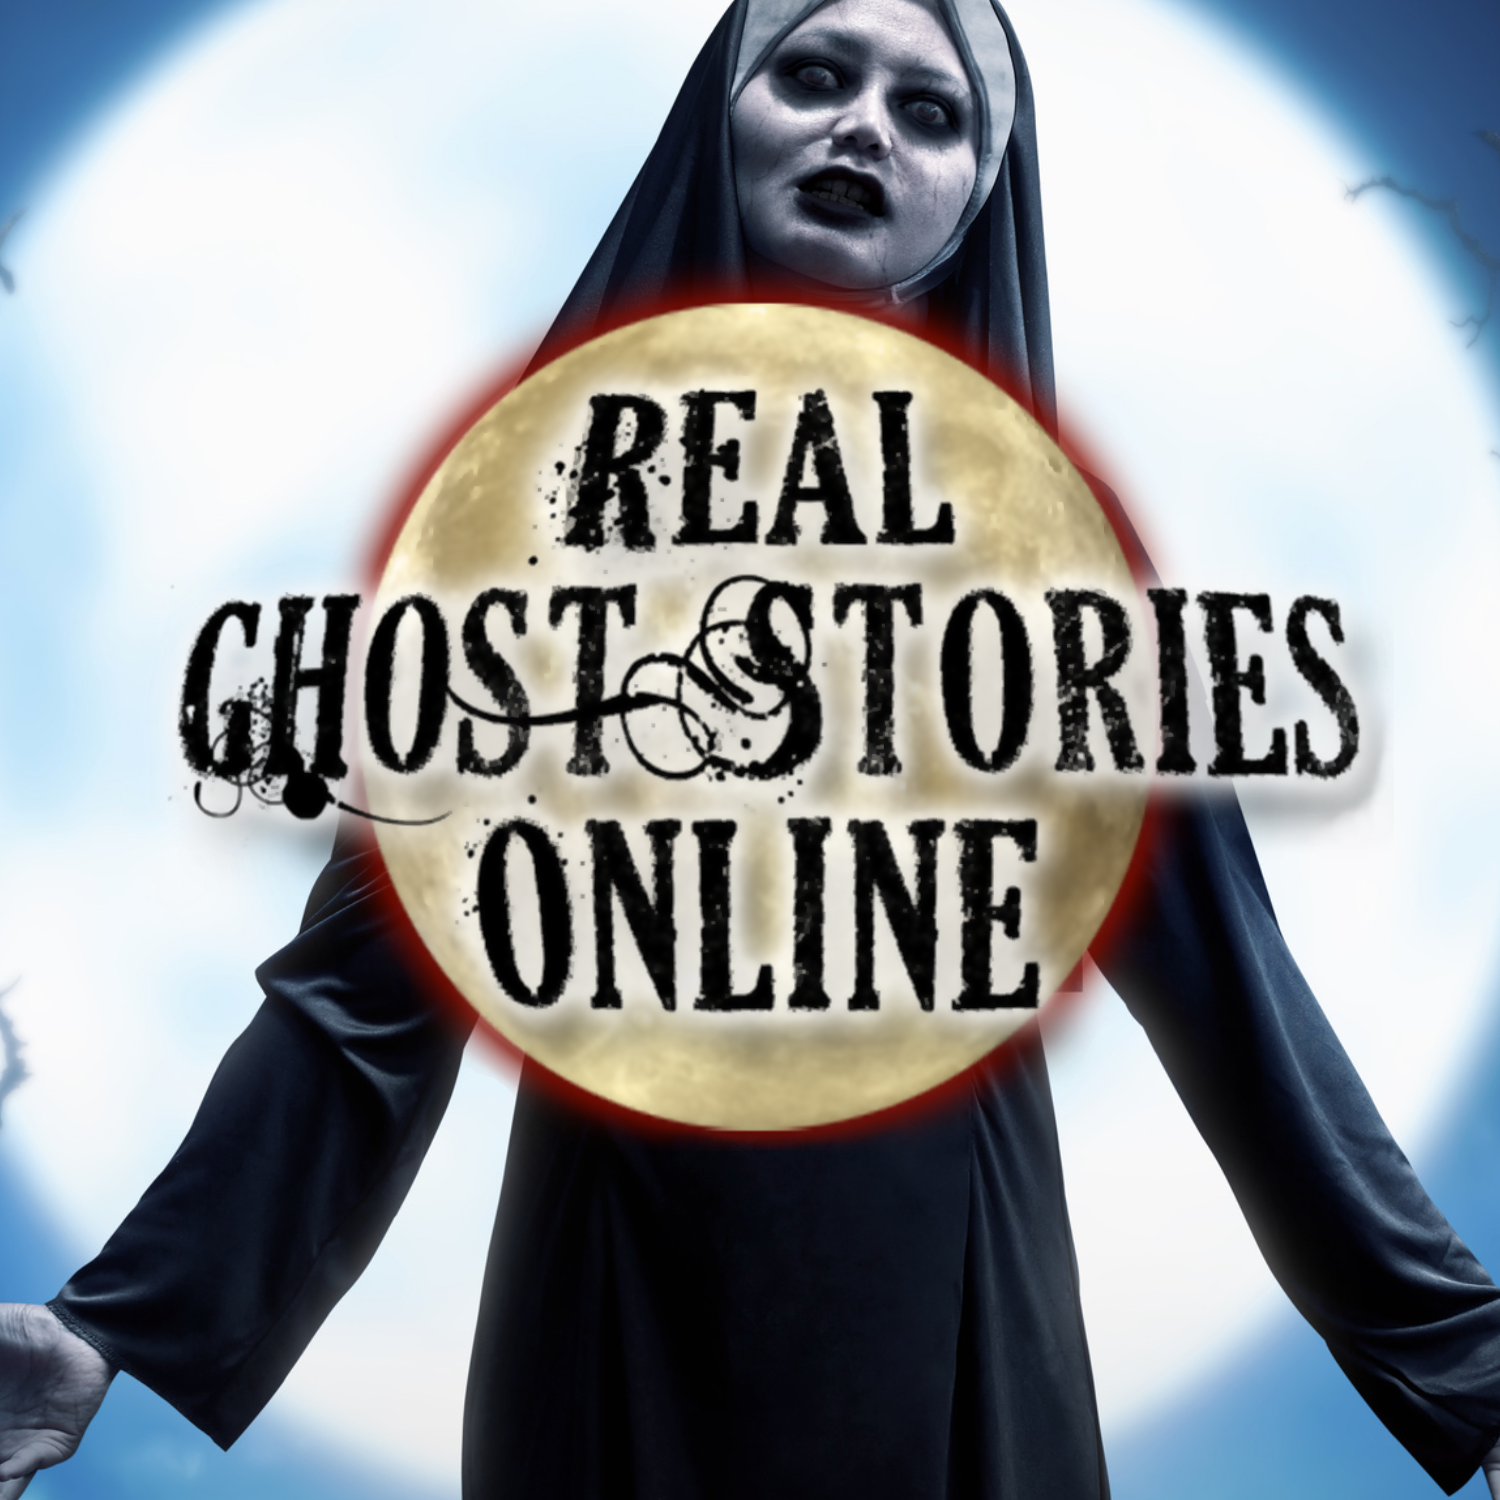 Infectious Energy | #TrueGhostStory #GhostStories #HorrorPodcast